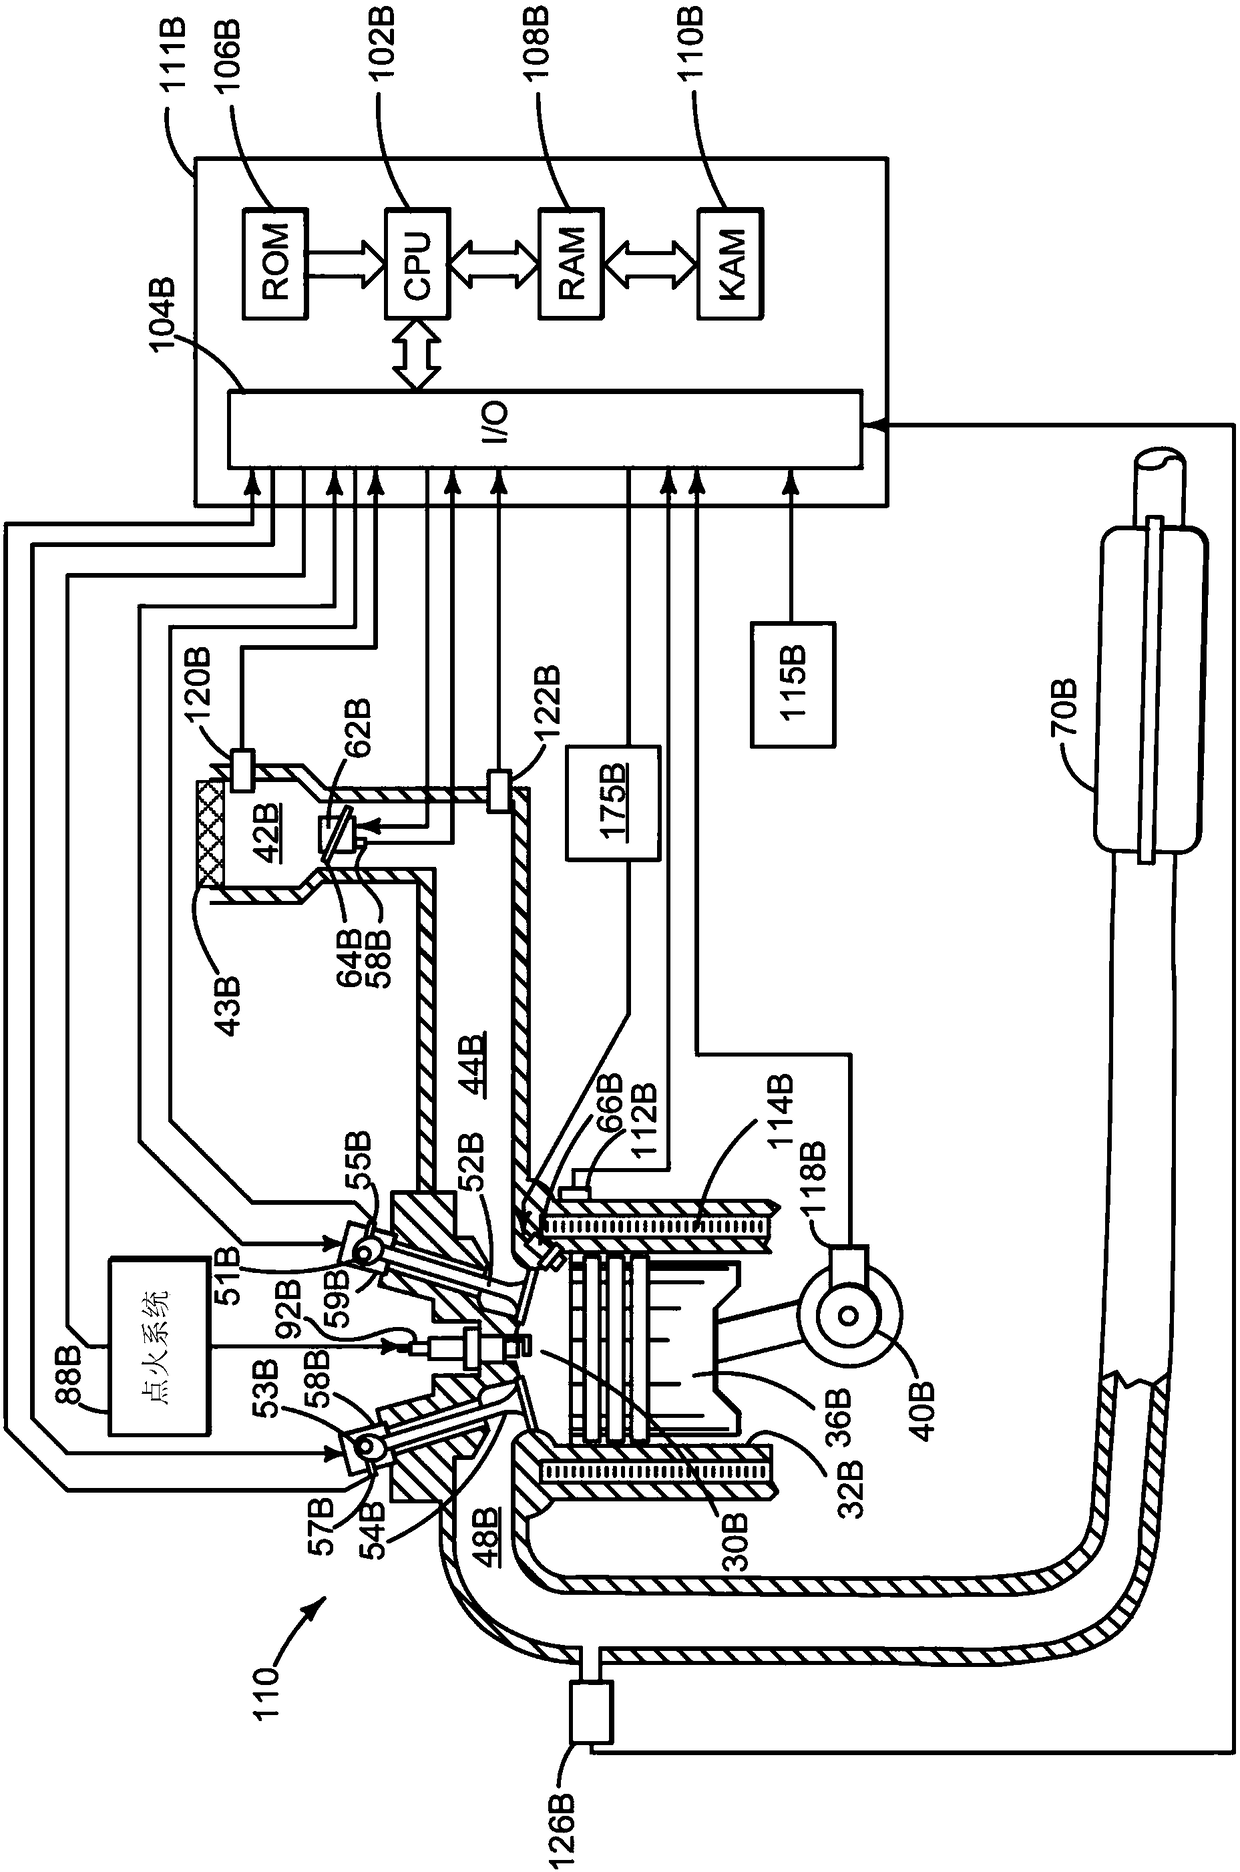 Methods and system for improving hybrid vehicle transmission gear shifting